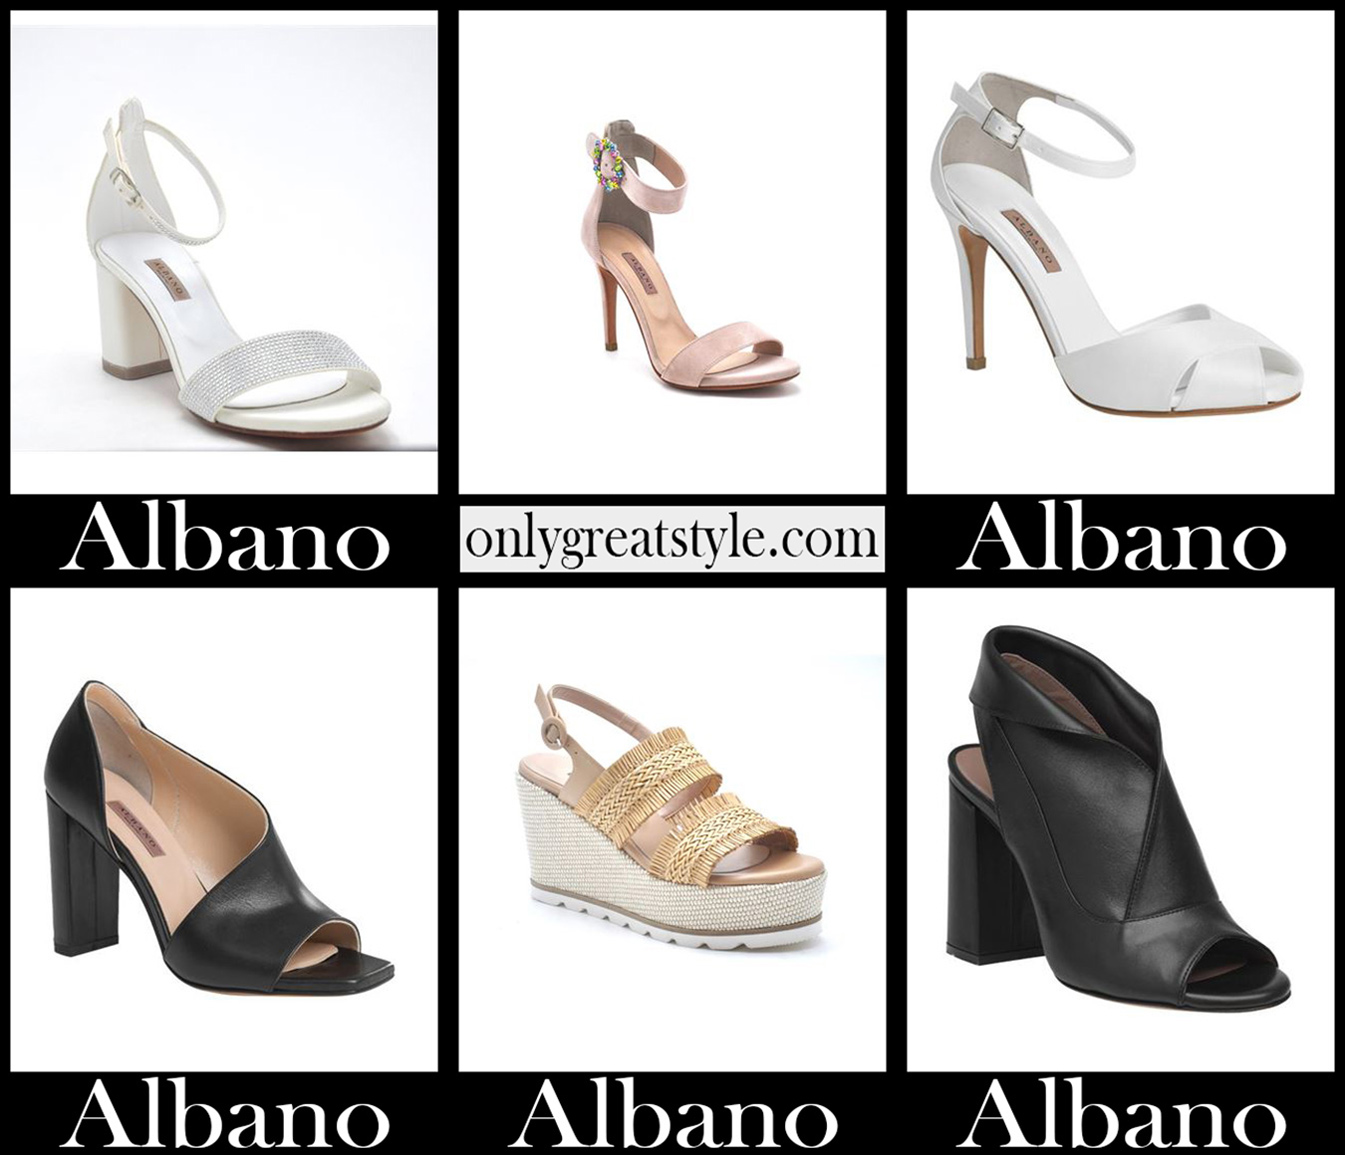 Albano shoes 2021 new arrivals womens footwear